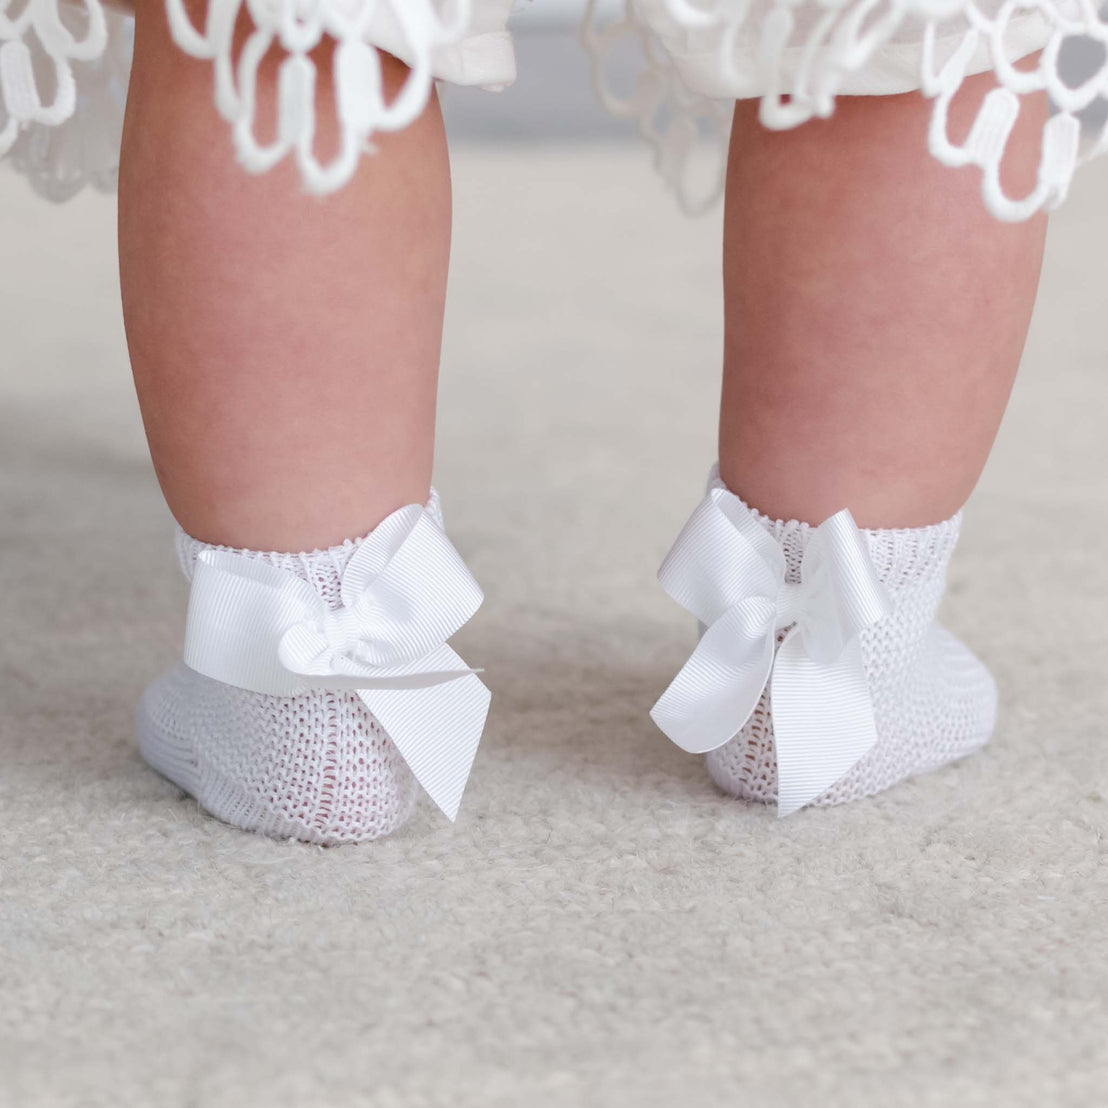 Close-up of a baby's feet in Garter Stitch Socks with Bow adorned with grosgrain ribbon bows, standing on a soft carpet.